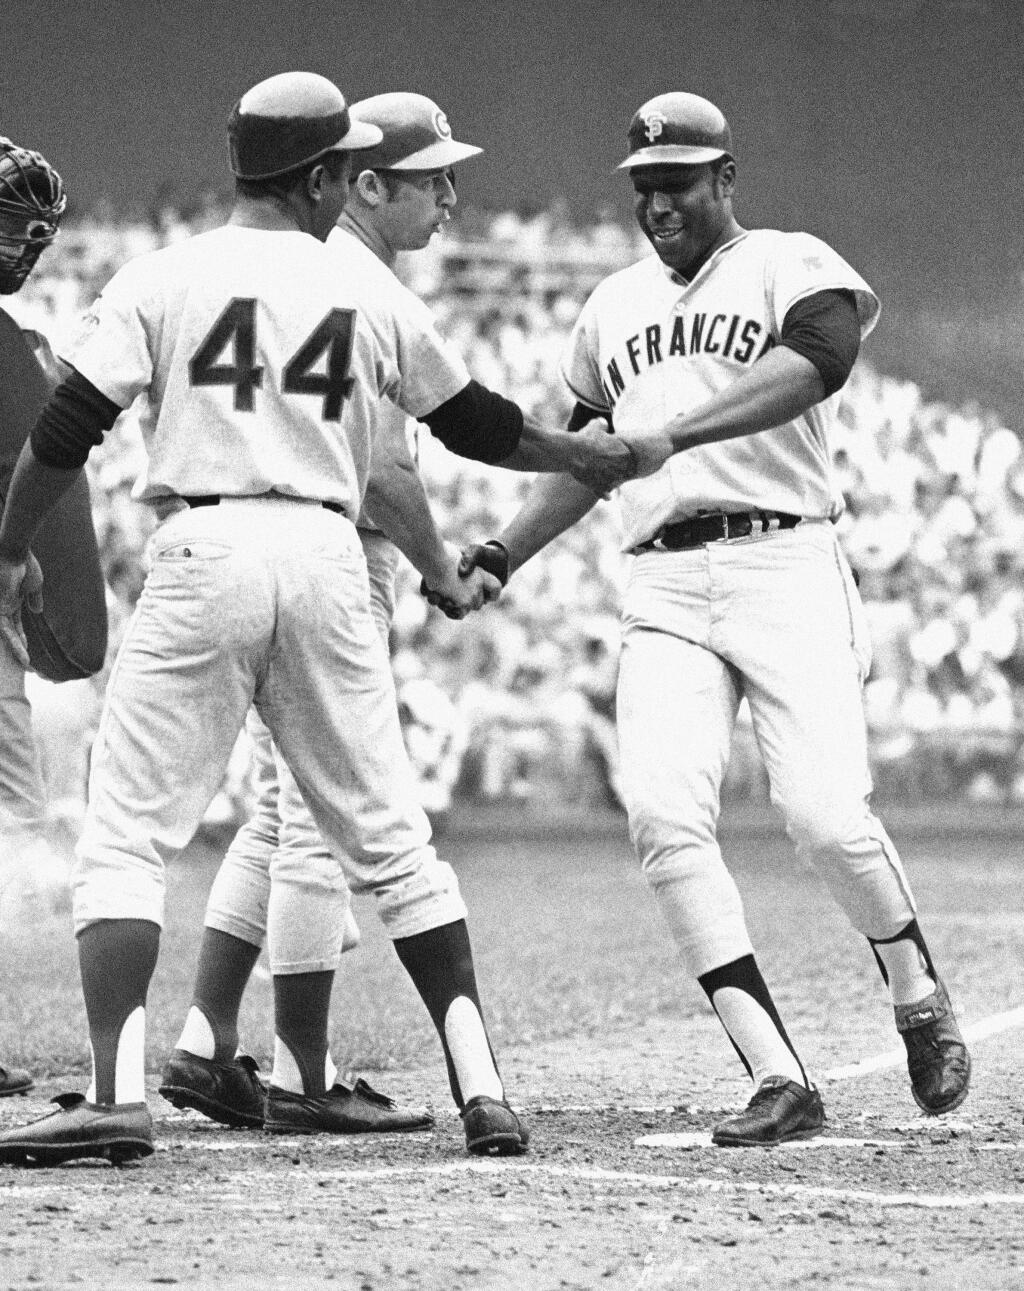 In this July 23, 1969, file photo, the National League's Willie McCovey of San Francisco is congratulated on crossing home in the third inning of the All-Star Game in Washington after batting in Hank Aaron (44). (AP Photo, File)